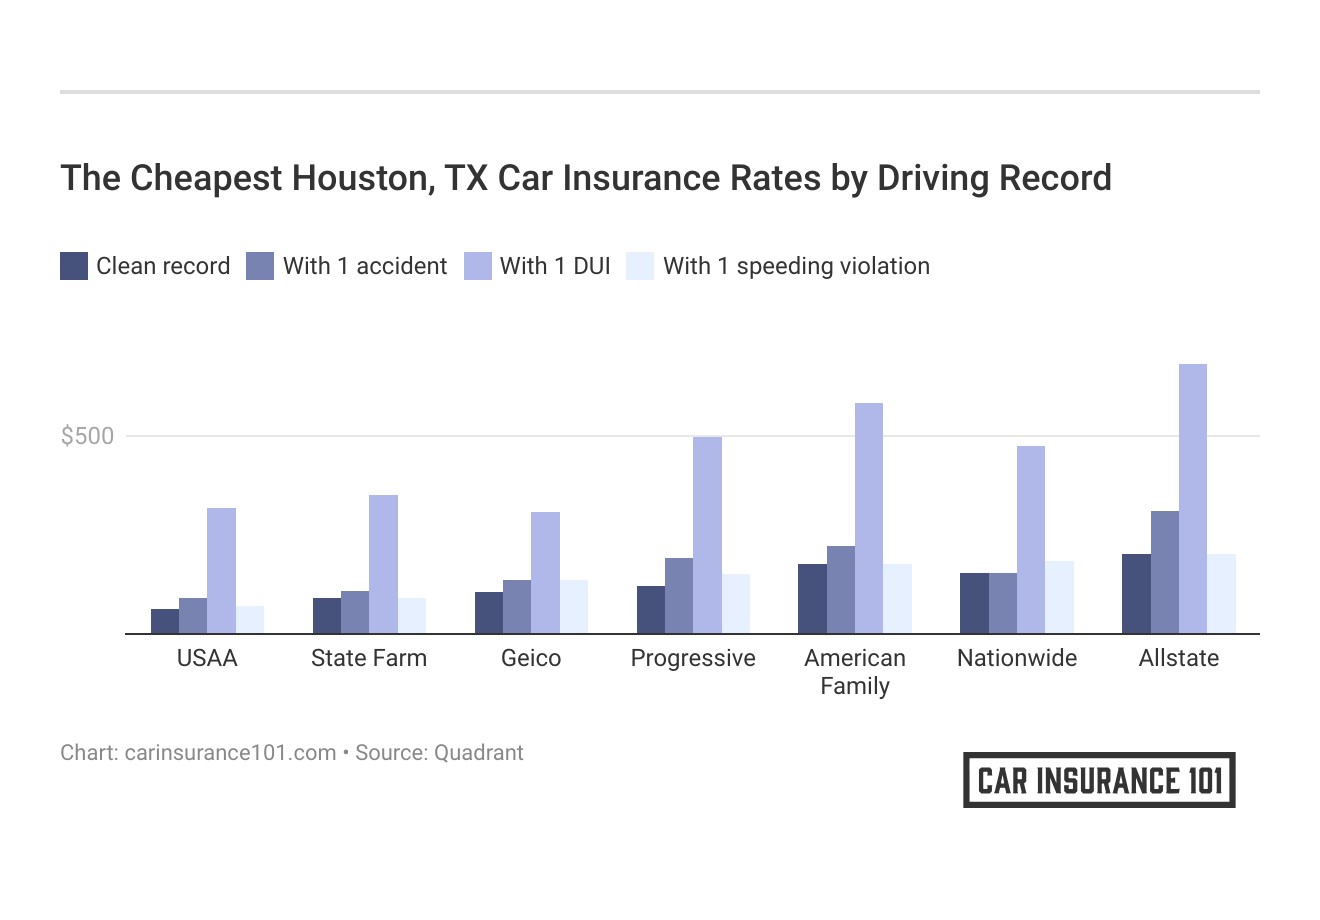 <h3>The Cheapest Houston, TX Car Insurance Rates by Driving Record</h3>